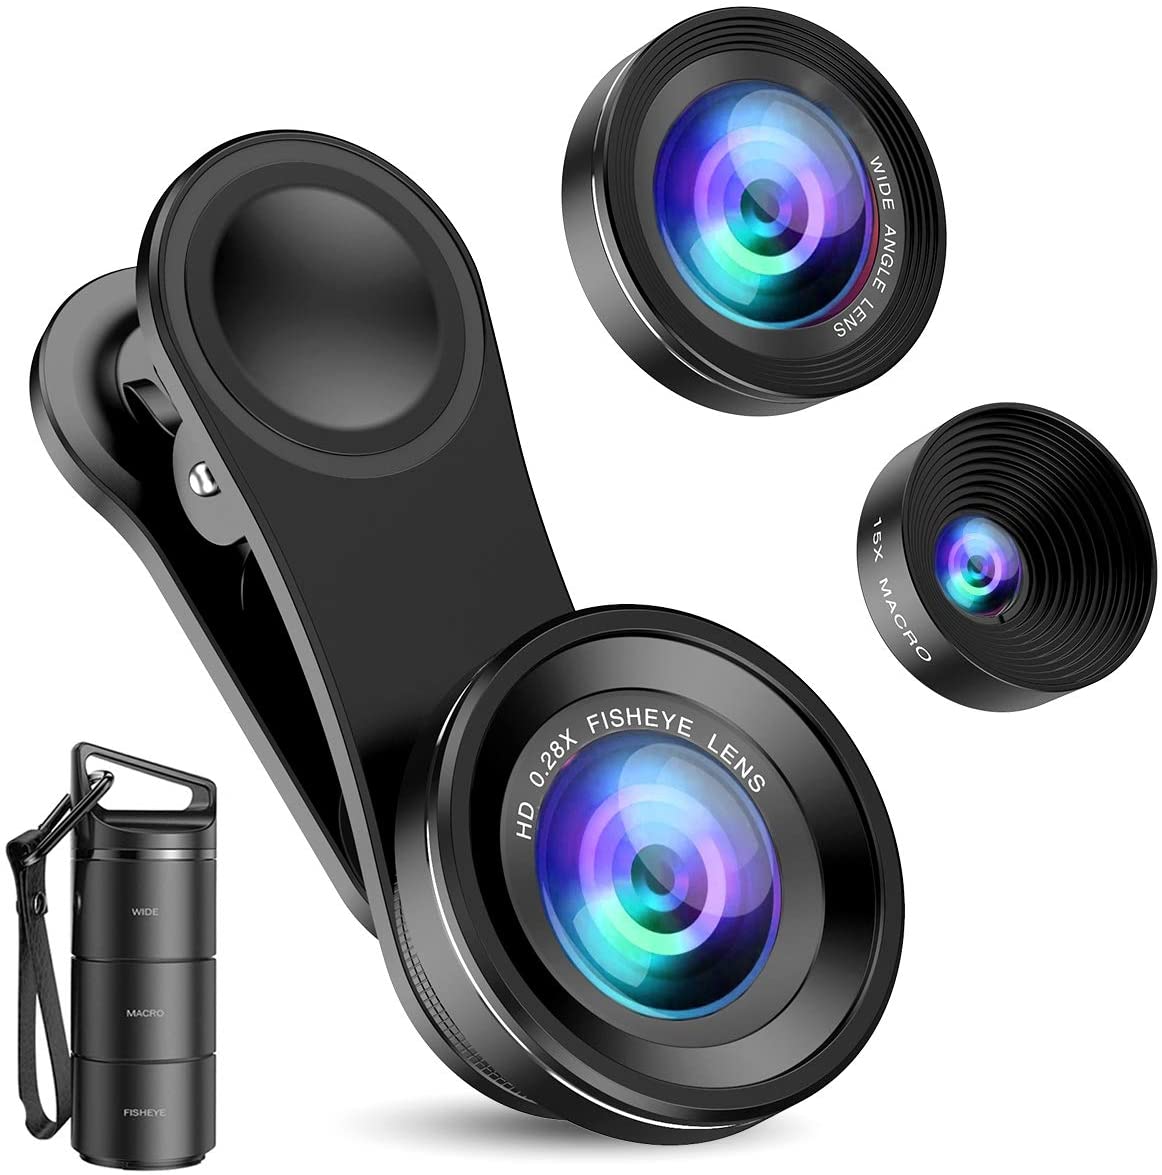 Criacr Phone Camera Lens, 3 in 1 Cell Phone Lens Kit for iPhone, Samsung, 180°Fisheye Lens, 0.6X Wide Angle Lens, 15X Macro Lens, for TIK Tok Video, Live Show, Video Chat, Vlog, etc